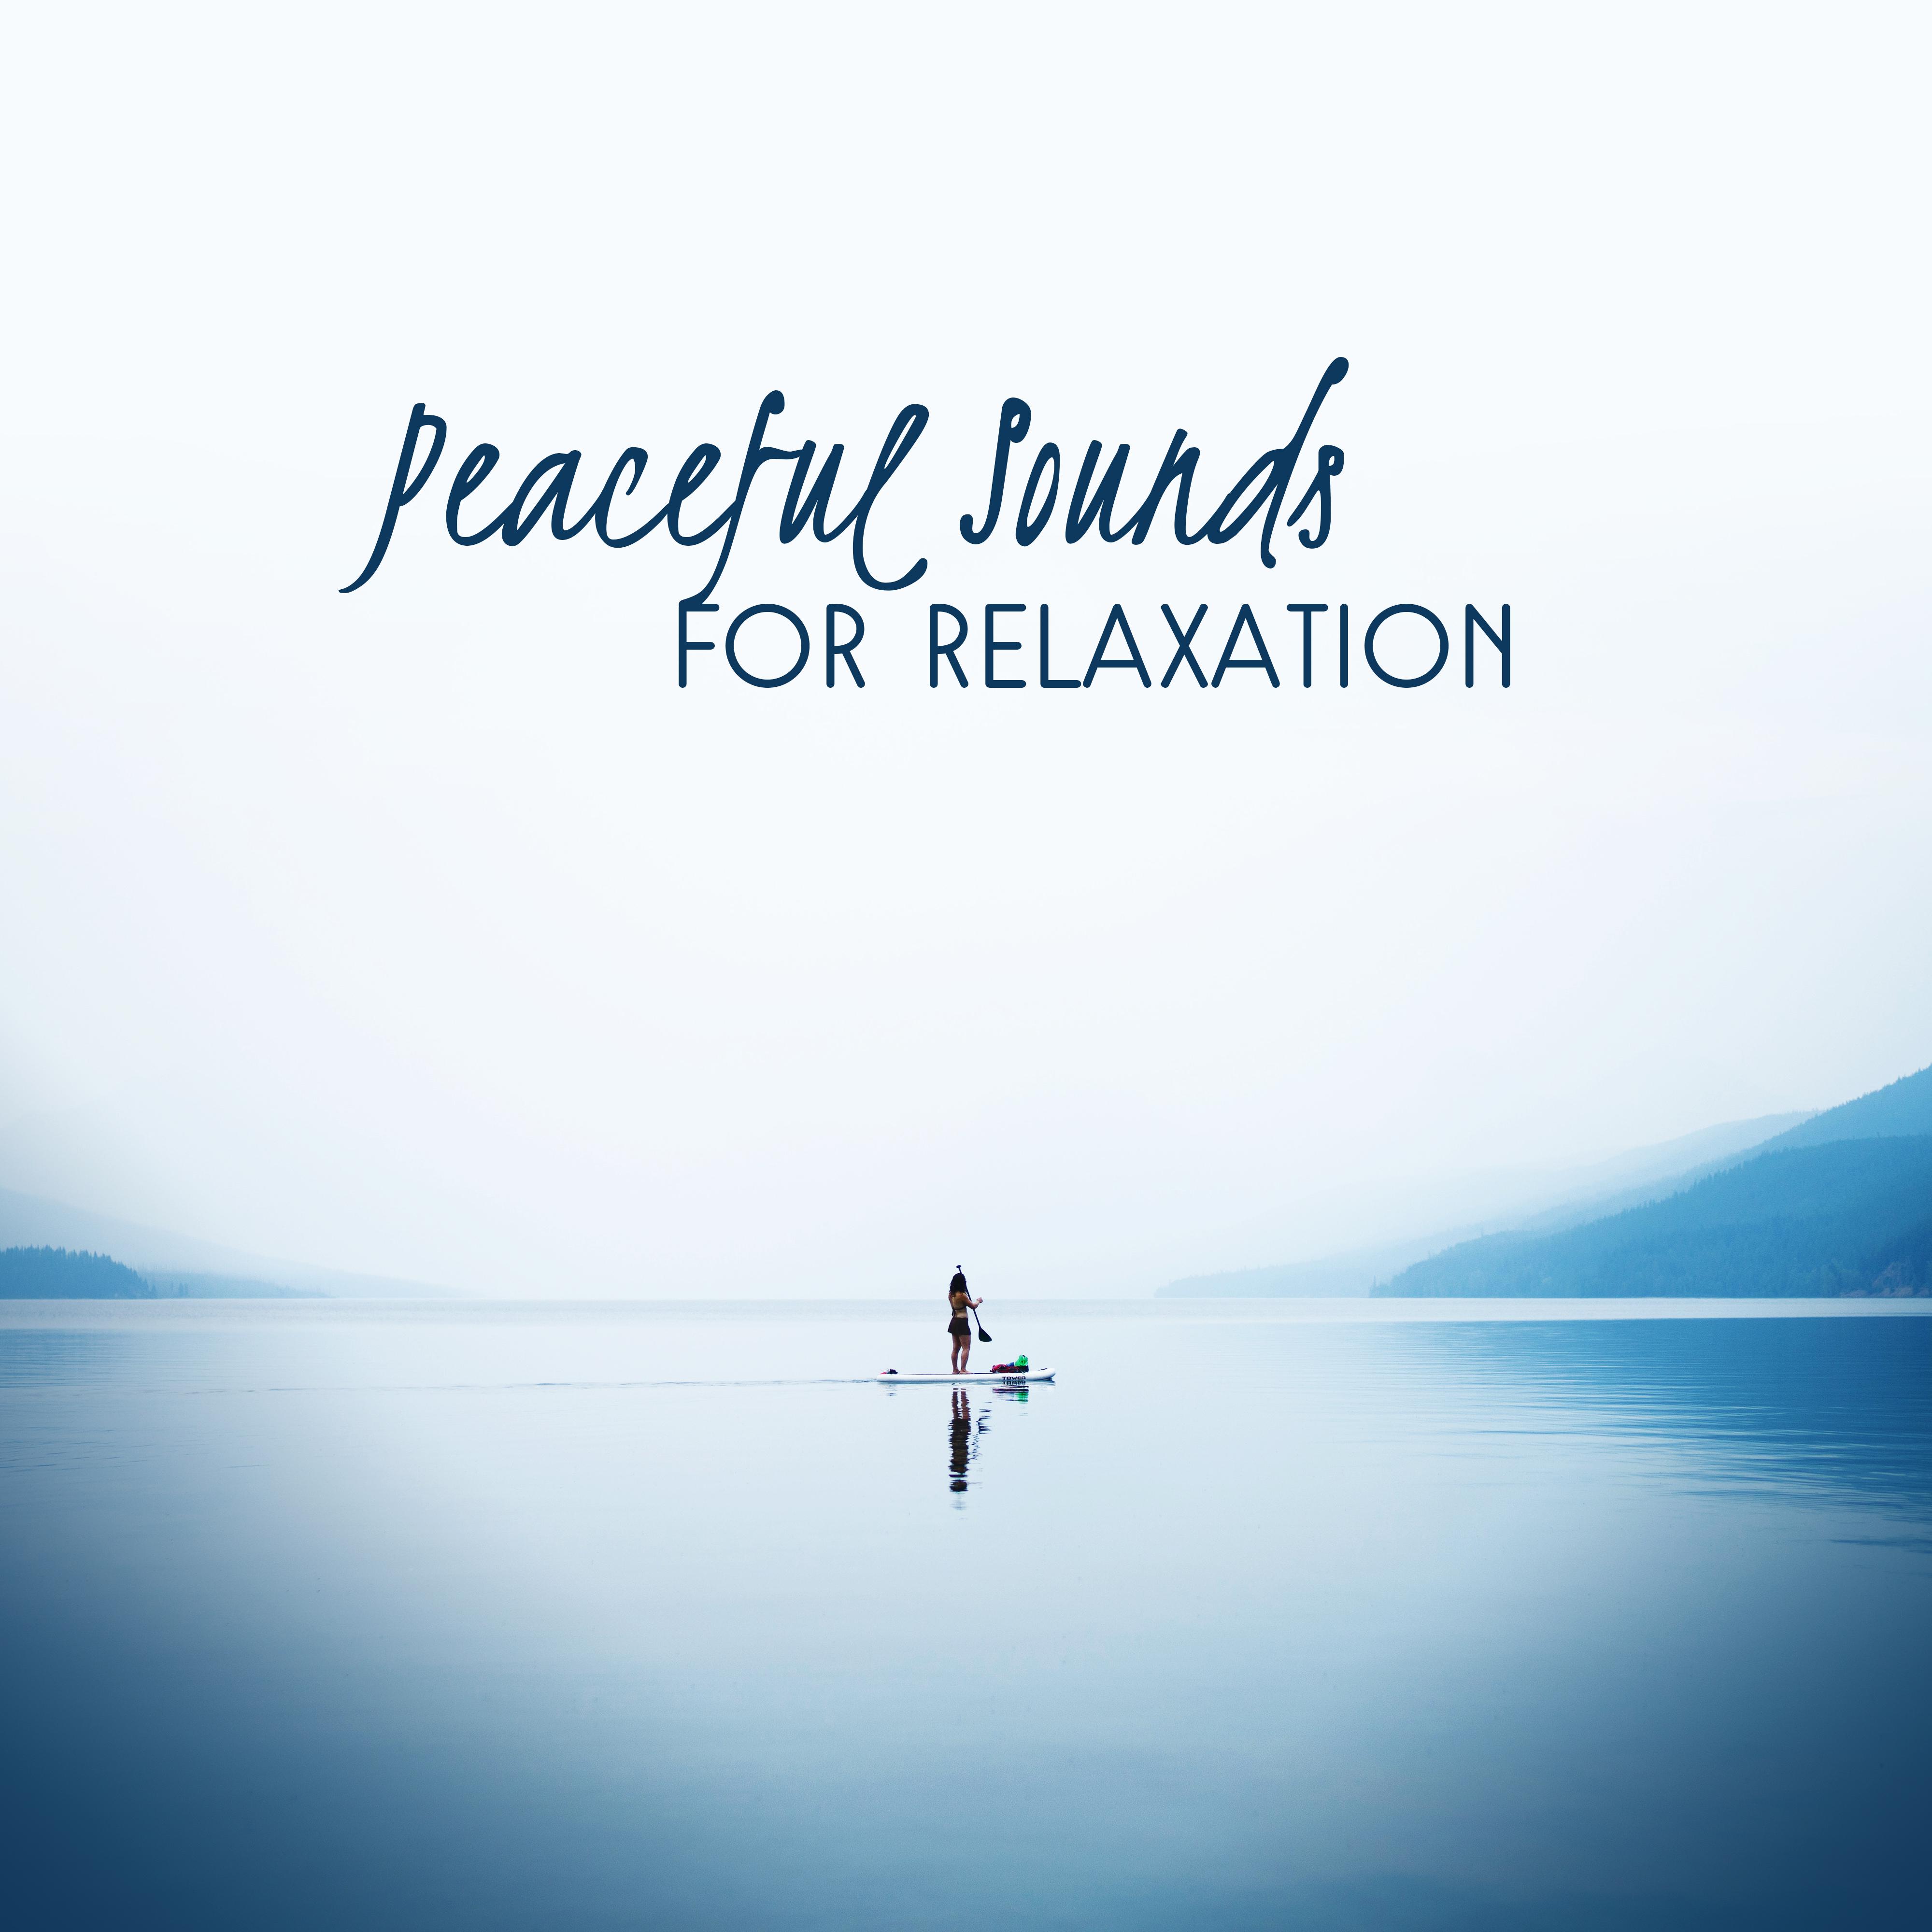 Peaceful Sounds for Relaxation